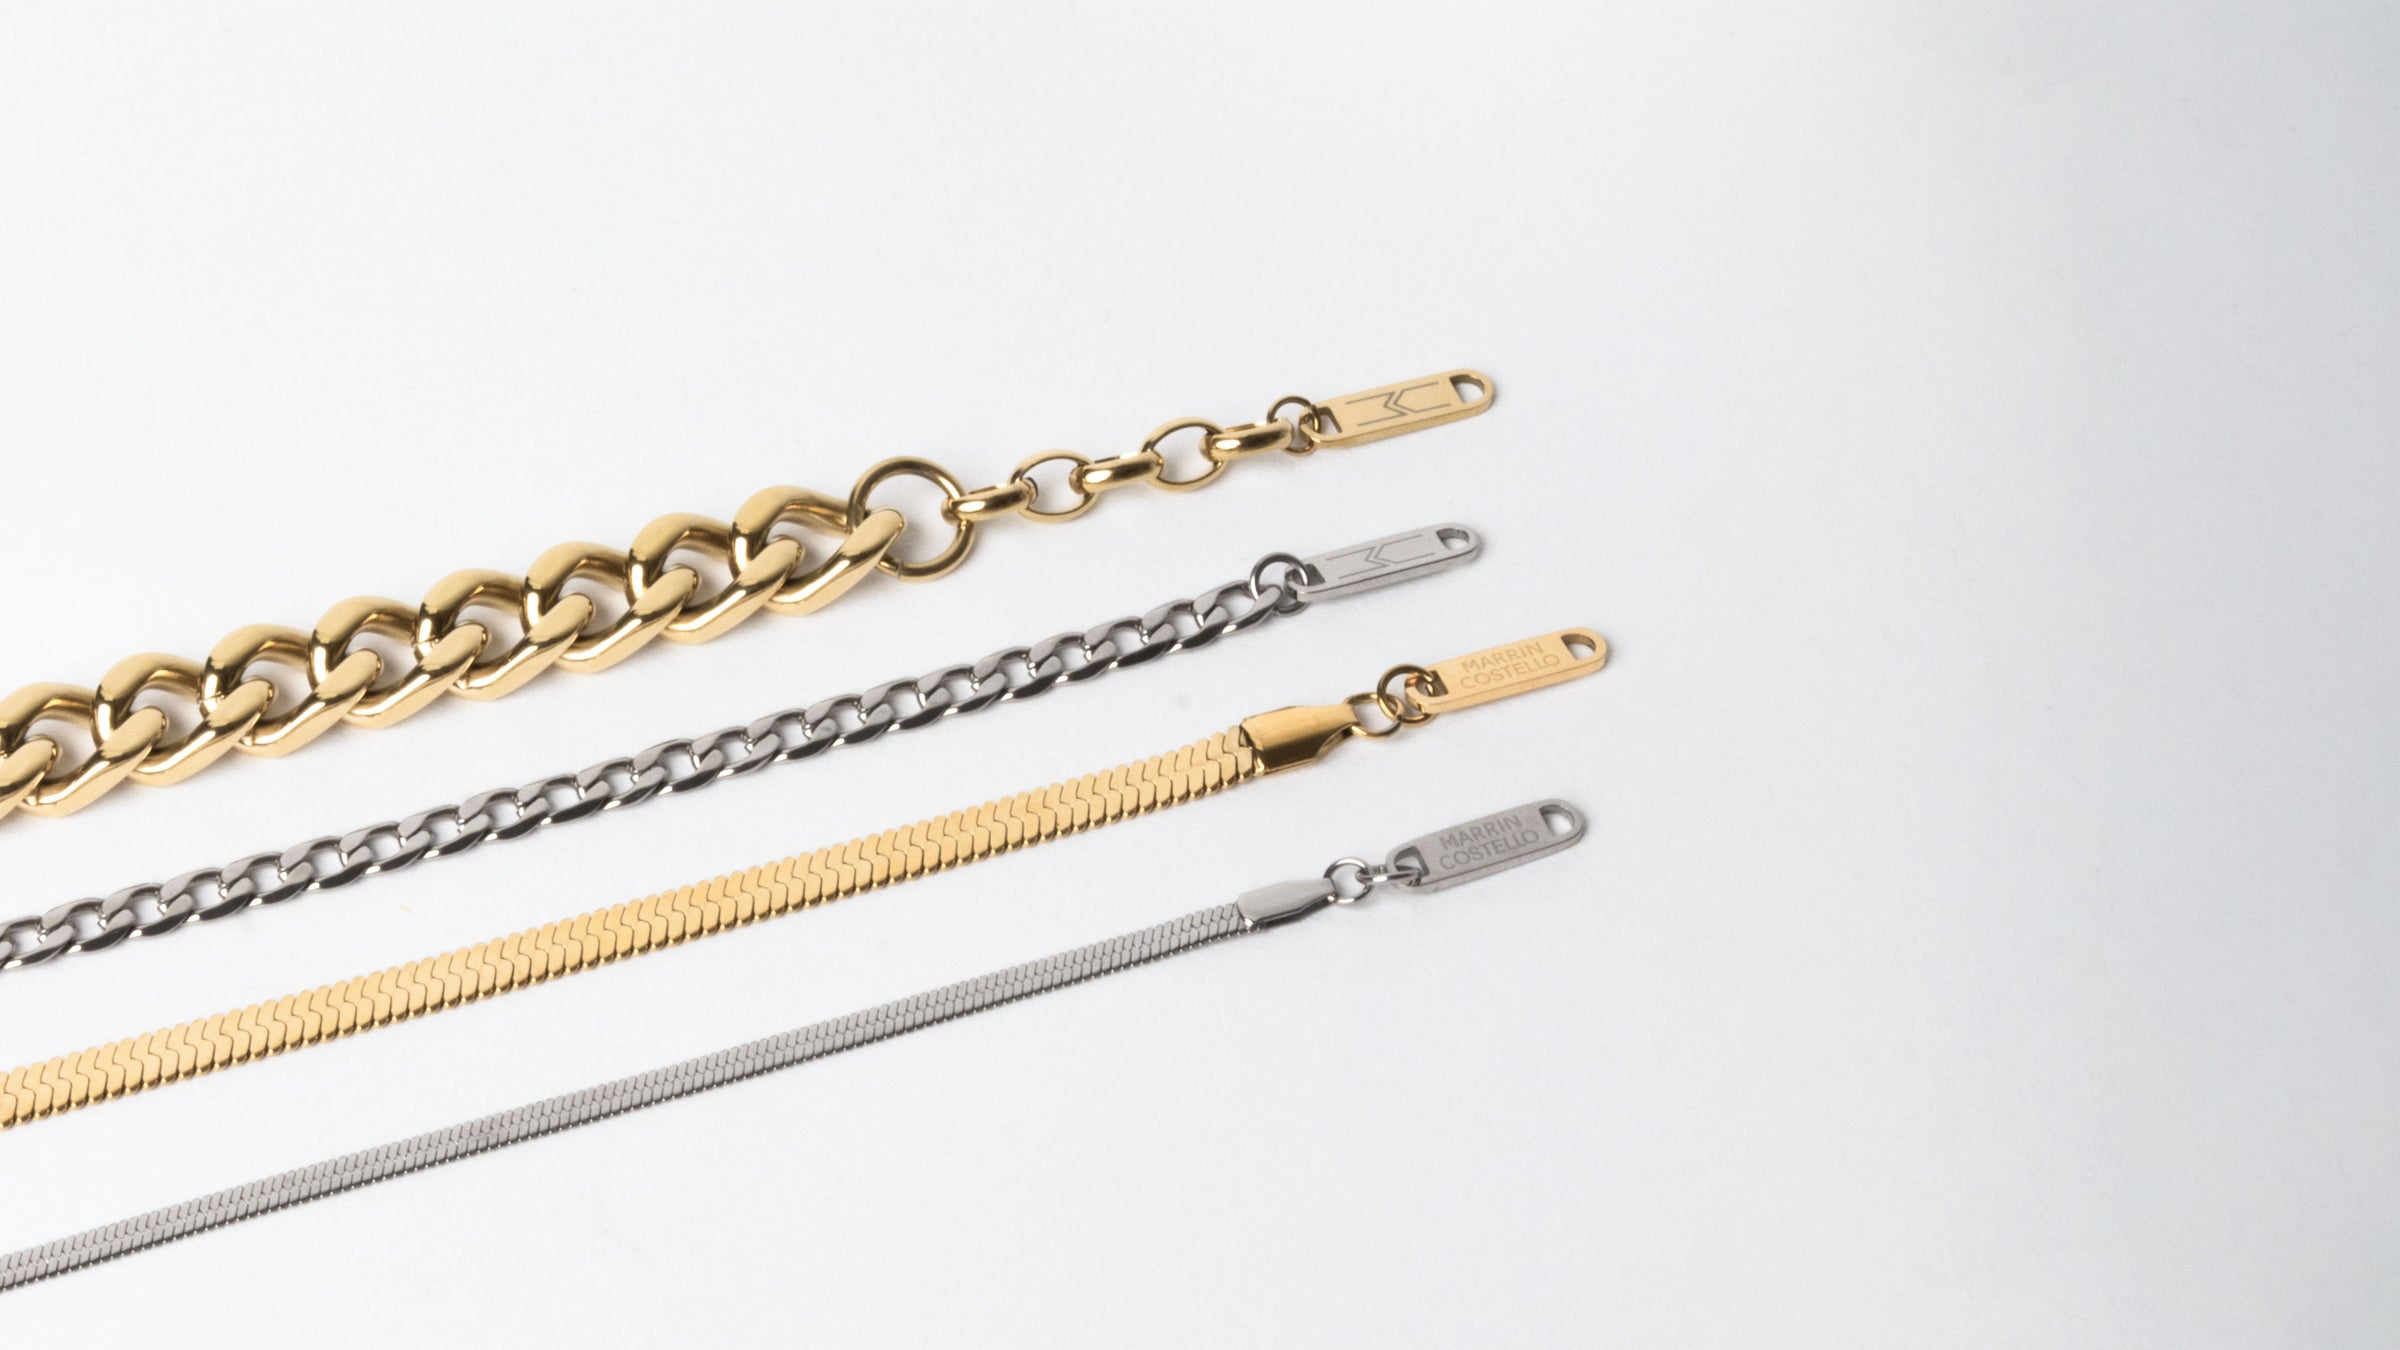 Anklets from the MARRIN COSTELLO jewelry collection, lined up to showcase the differences between the Queens, Callie, and Ramsey anklets. Available in 14k gold plated stainless steel and polished stainless steel.